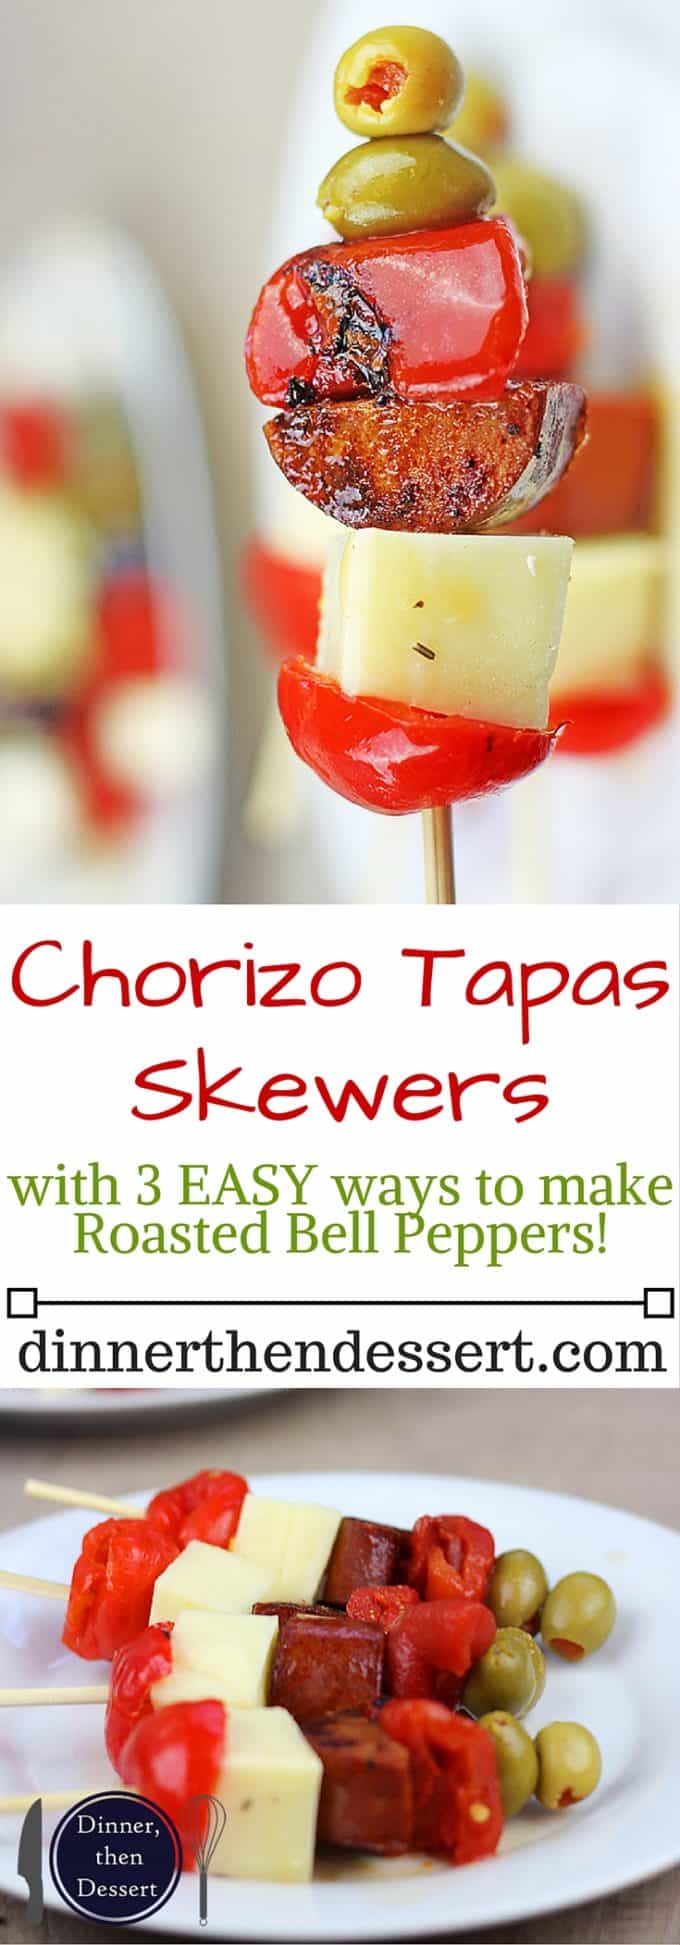 Made with peppers, Manchego cheese and stuffed olives, these skewers come together in a matter of minutes! PLUS 3 ways to Roast Bell Peppers on your grill, your stovetop or your oven!